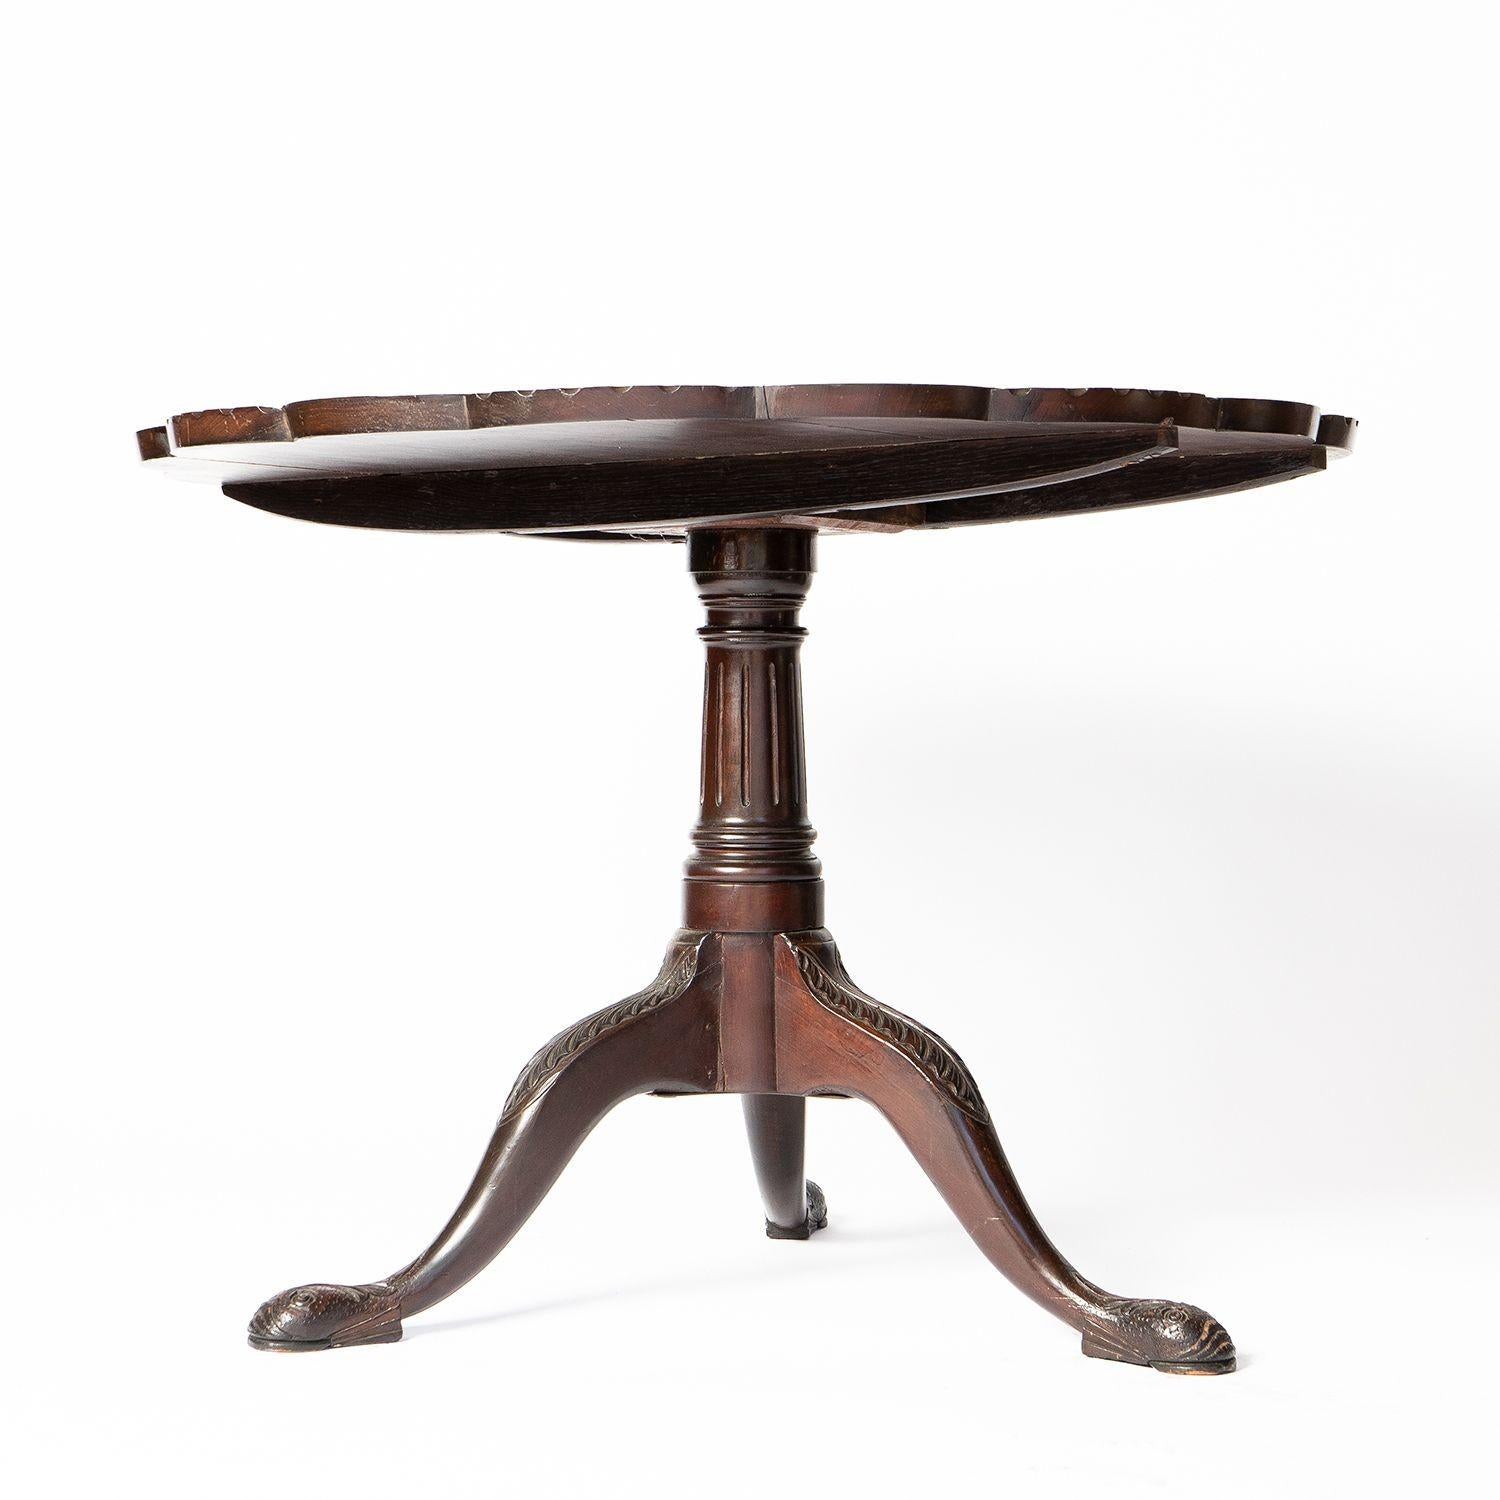 Antique Georgian Tripod Table

Profusely carved, possibly later in the 19th Century.

The multi-dished, tilt-top with elaborate acanthus and spandrel carving, on a columnar-turned stem with tripod cabriole legs and carved slipper feet.

It is in